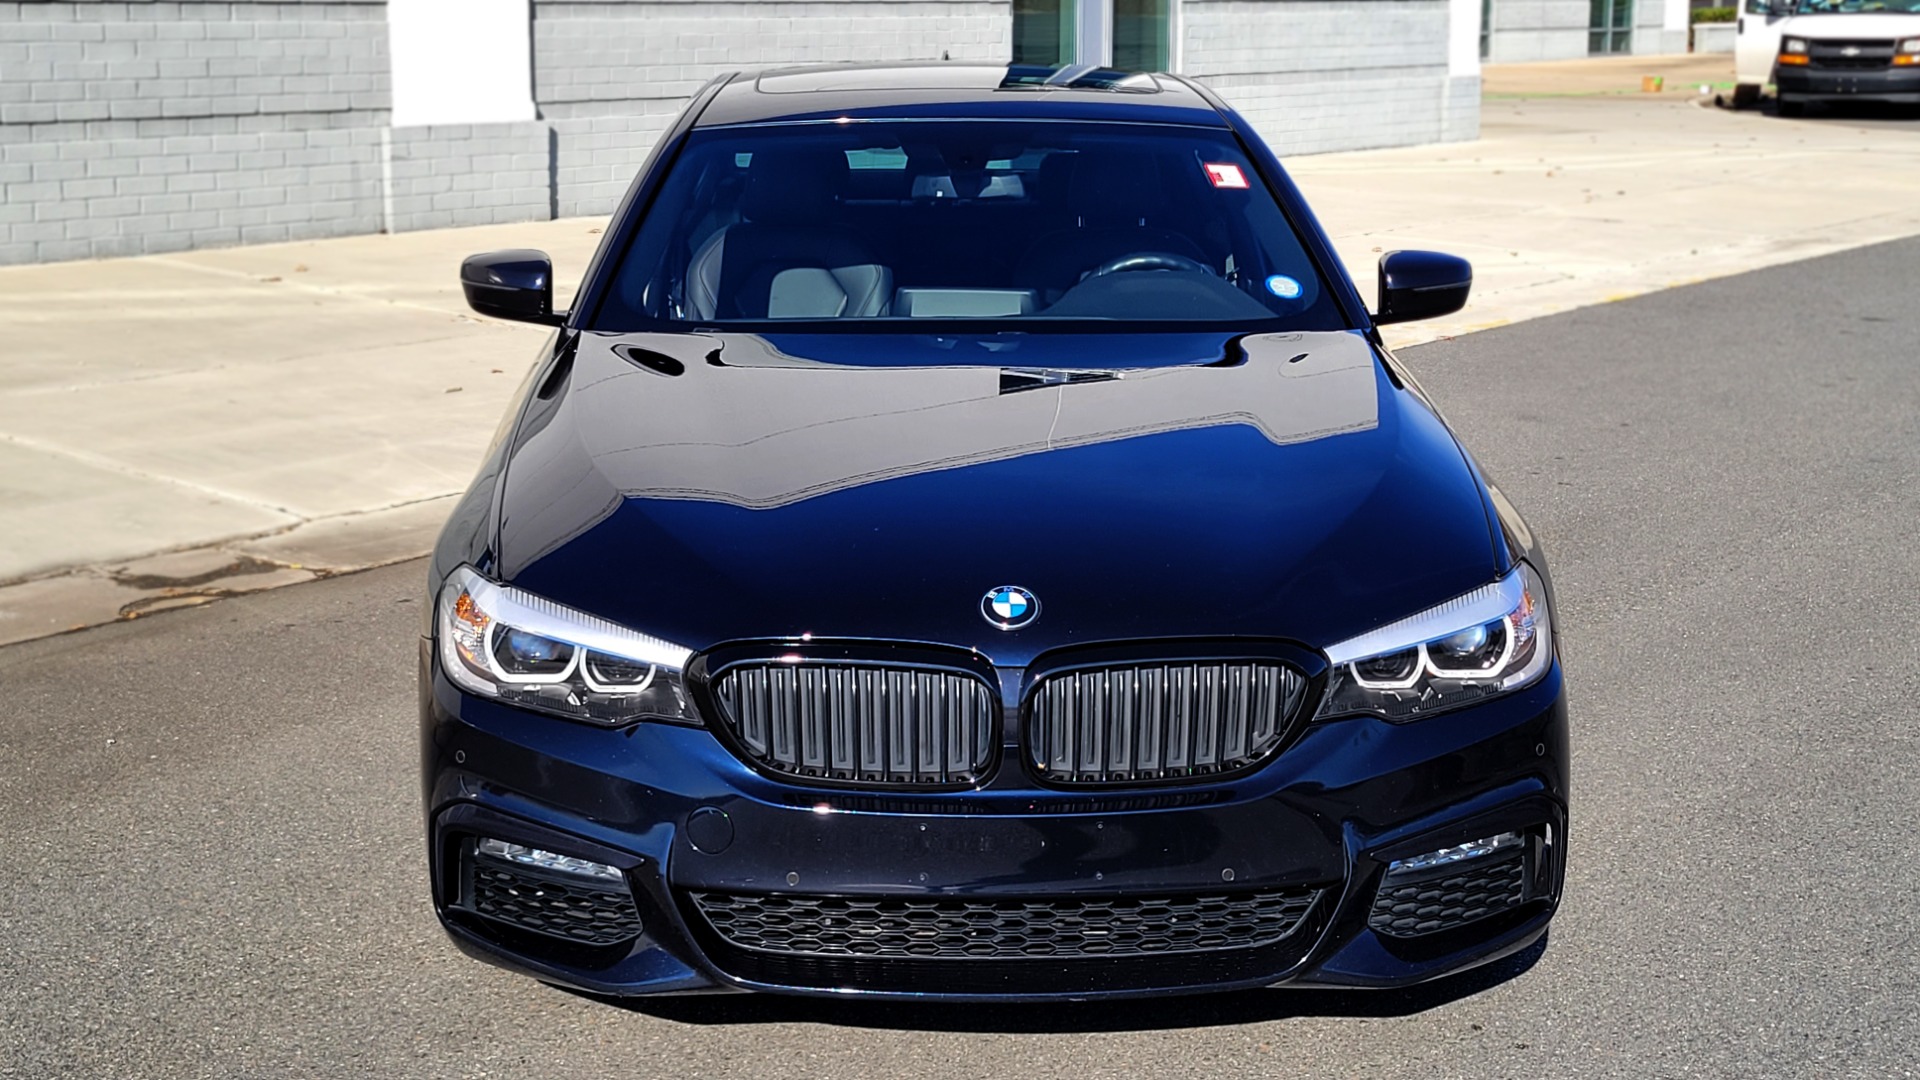 Used 2018 BMW 5 SERIES 540I XDRIVE 3.0L / M-SPORT / NAV / WIFI / SUNROOF / REARVIEW for sale $41,595 at Formula Imports in Charlotte NC 28227 11